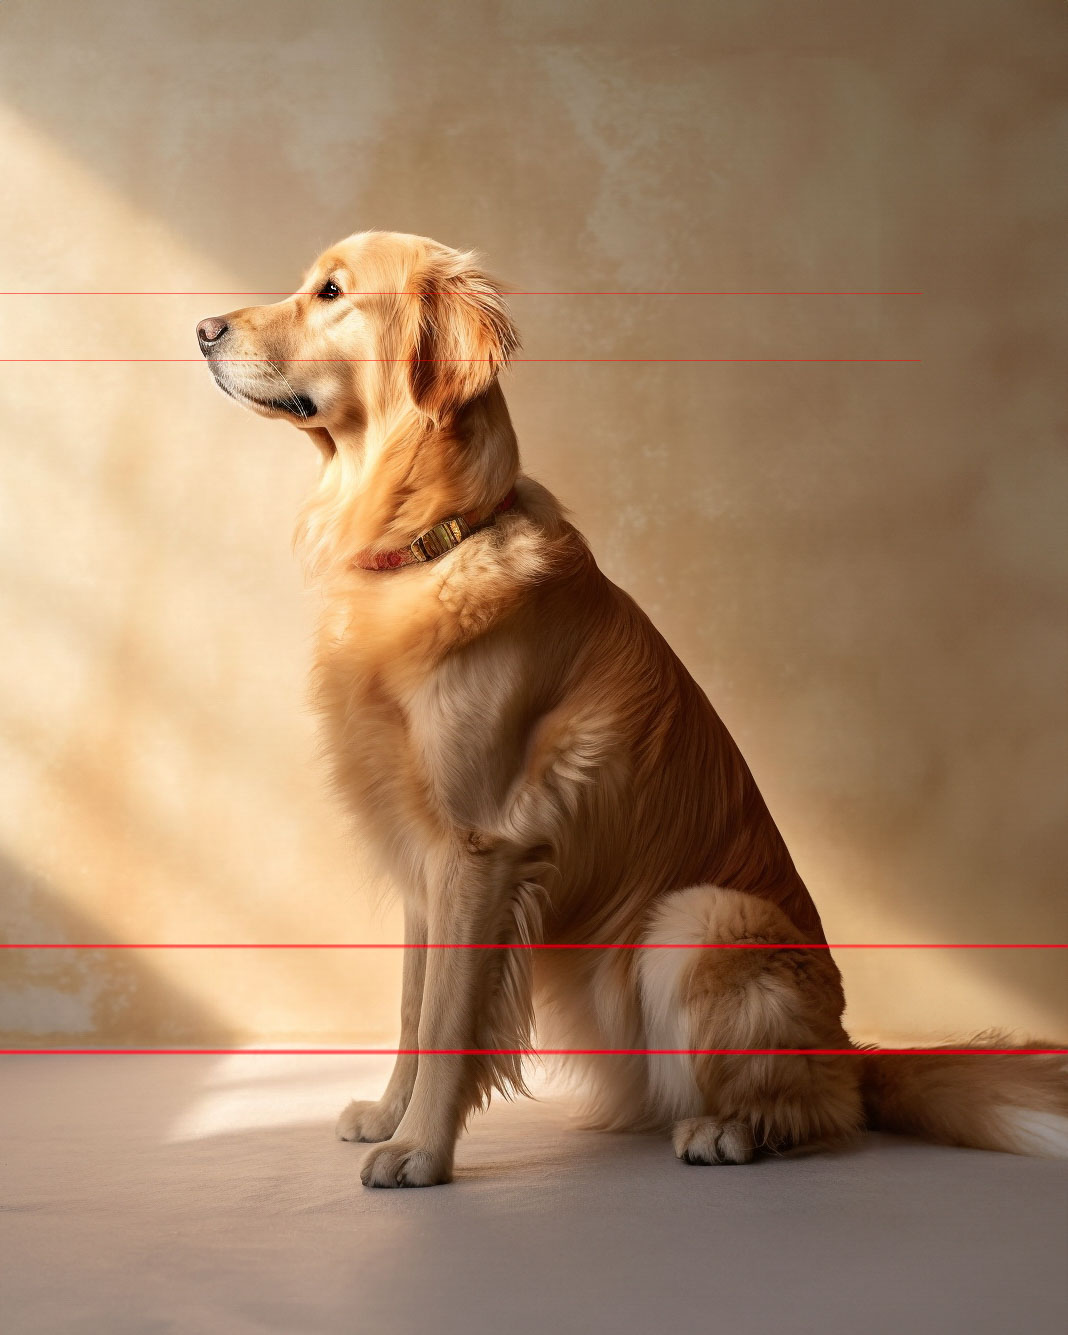 A golden retriever sits calmly on the floor in a warmly lit room. Its golden fur illuminated by a soft beam of sunlight coming from the left side of the picture. The background is a muted, earthy-toned wall, creating a serene and cozy atmosphere.